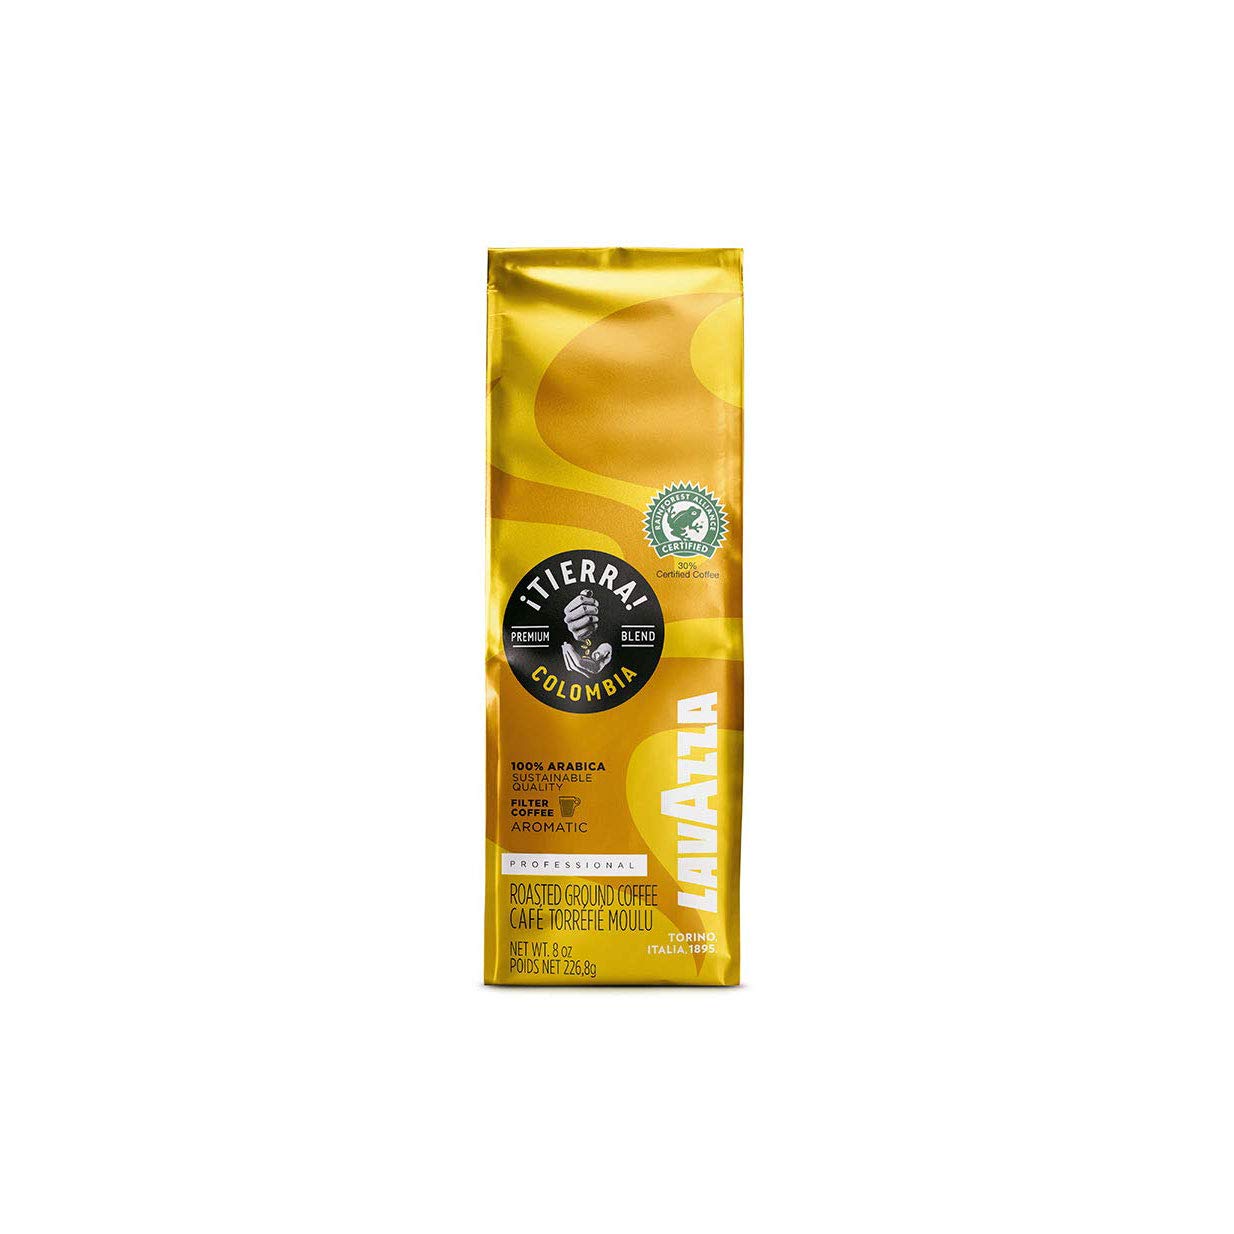 Lavazza ¡TIERRA! Colombia 100% Arabica-filter Authentic Italian, Blended And Roated in Italy, Fruity aroma with a balanced body-filter resulting in notes of grapefruit, red fruits, bergamot & Honey